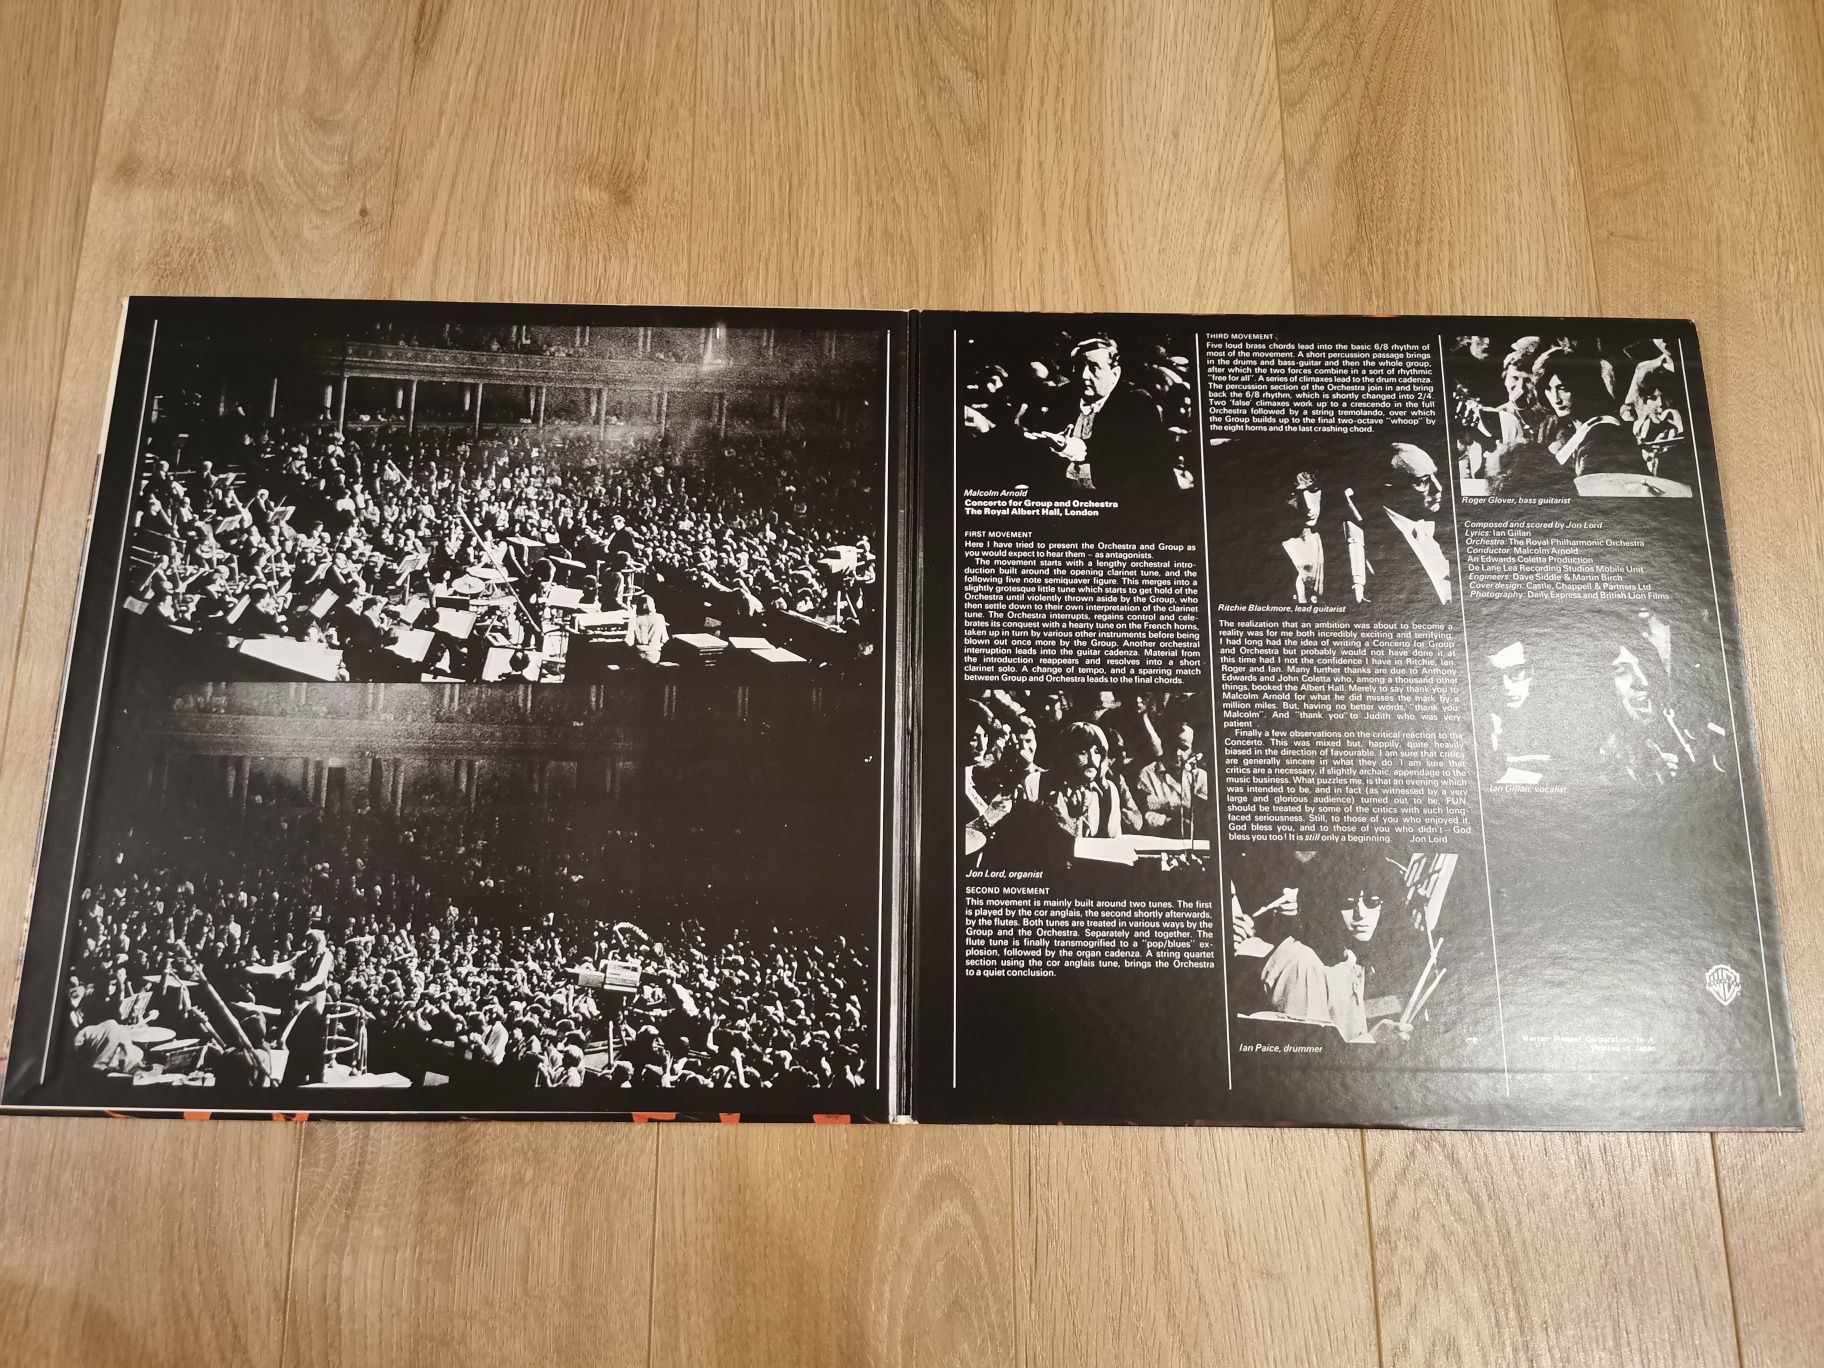 Deep purple - The royal orchestra, LP, Japan, NM, Limited